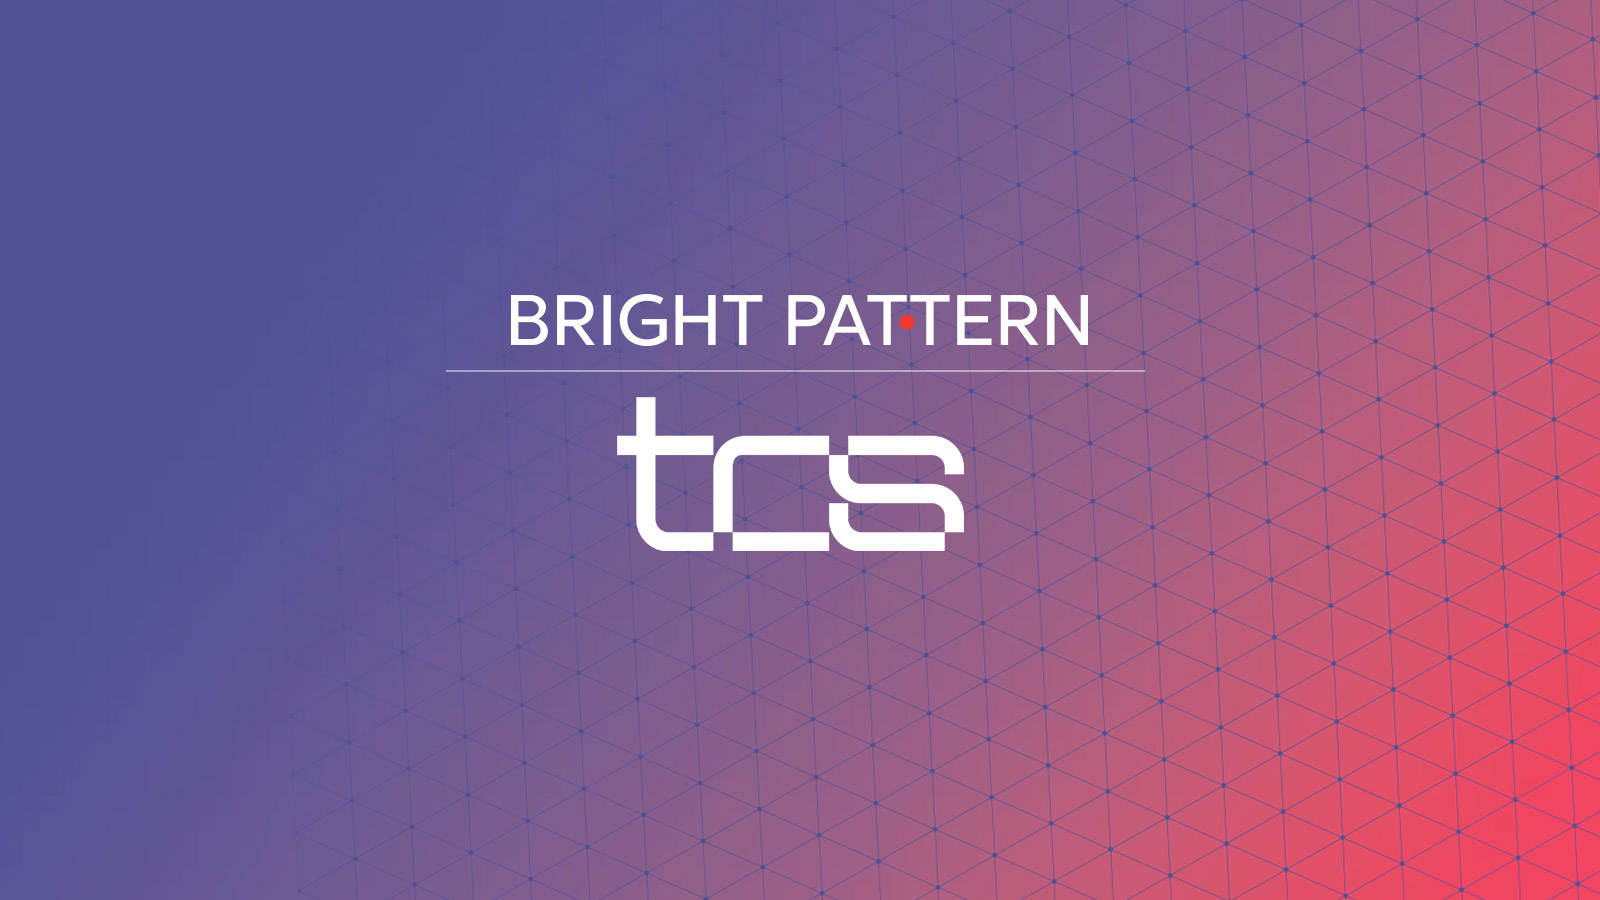 Bright Pattern Partners with Teleconnect & Service GmbH in Germany to Deliver Omnichannel Contact Center Solutions for the DACH Region